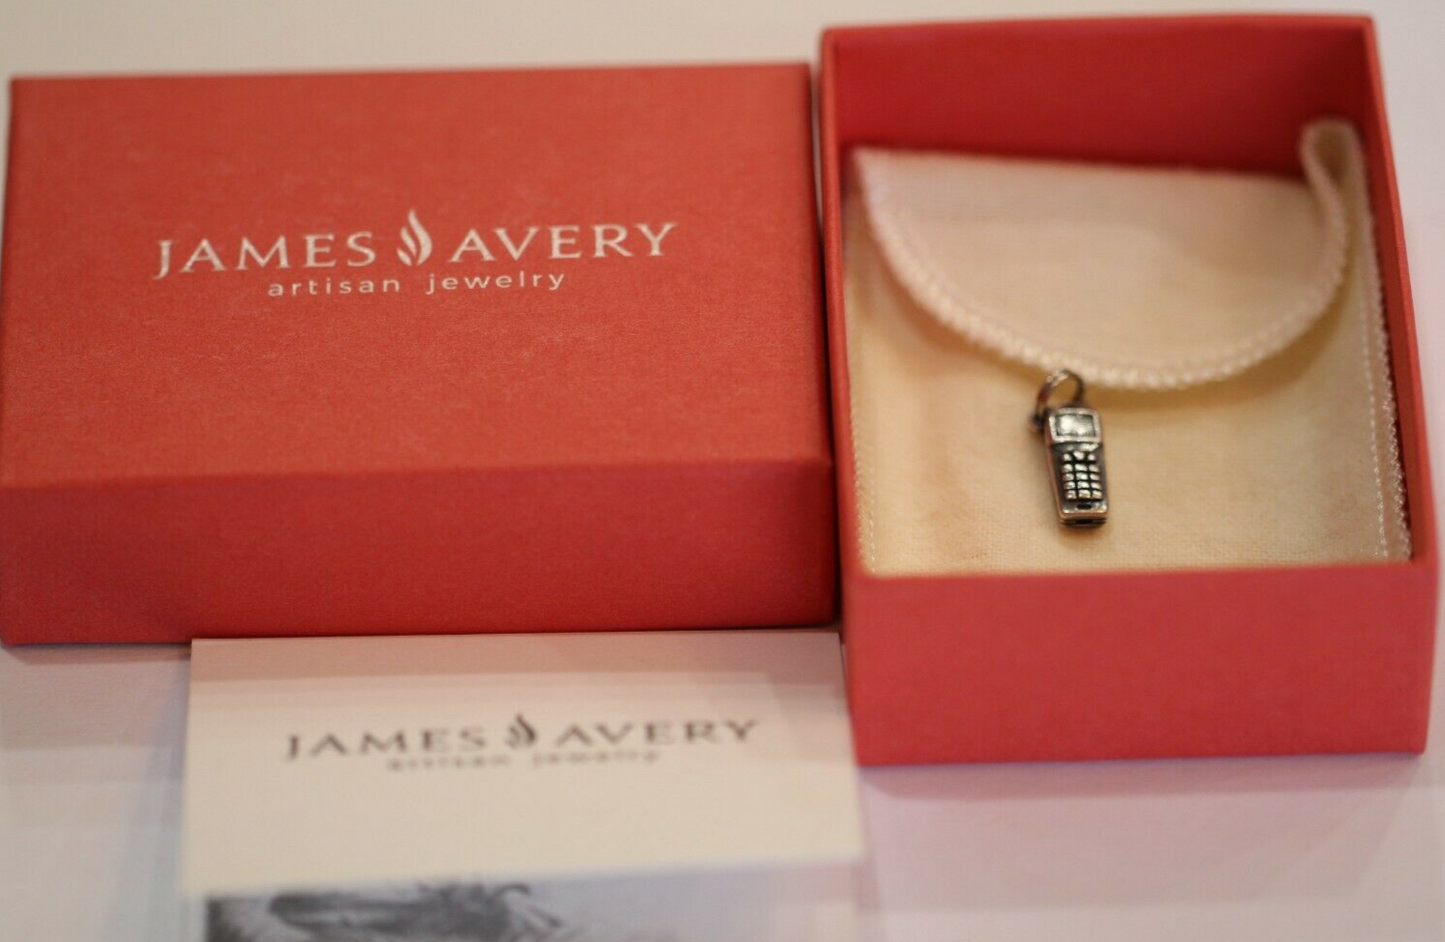 *RETIRED* - James Avery Sterling Silver Cell Phone Charm